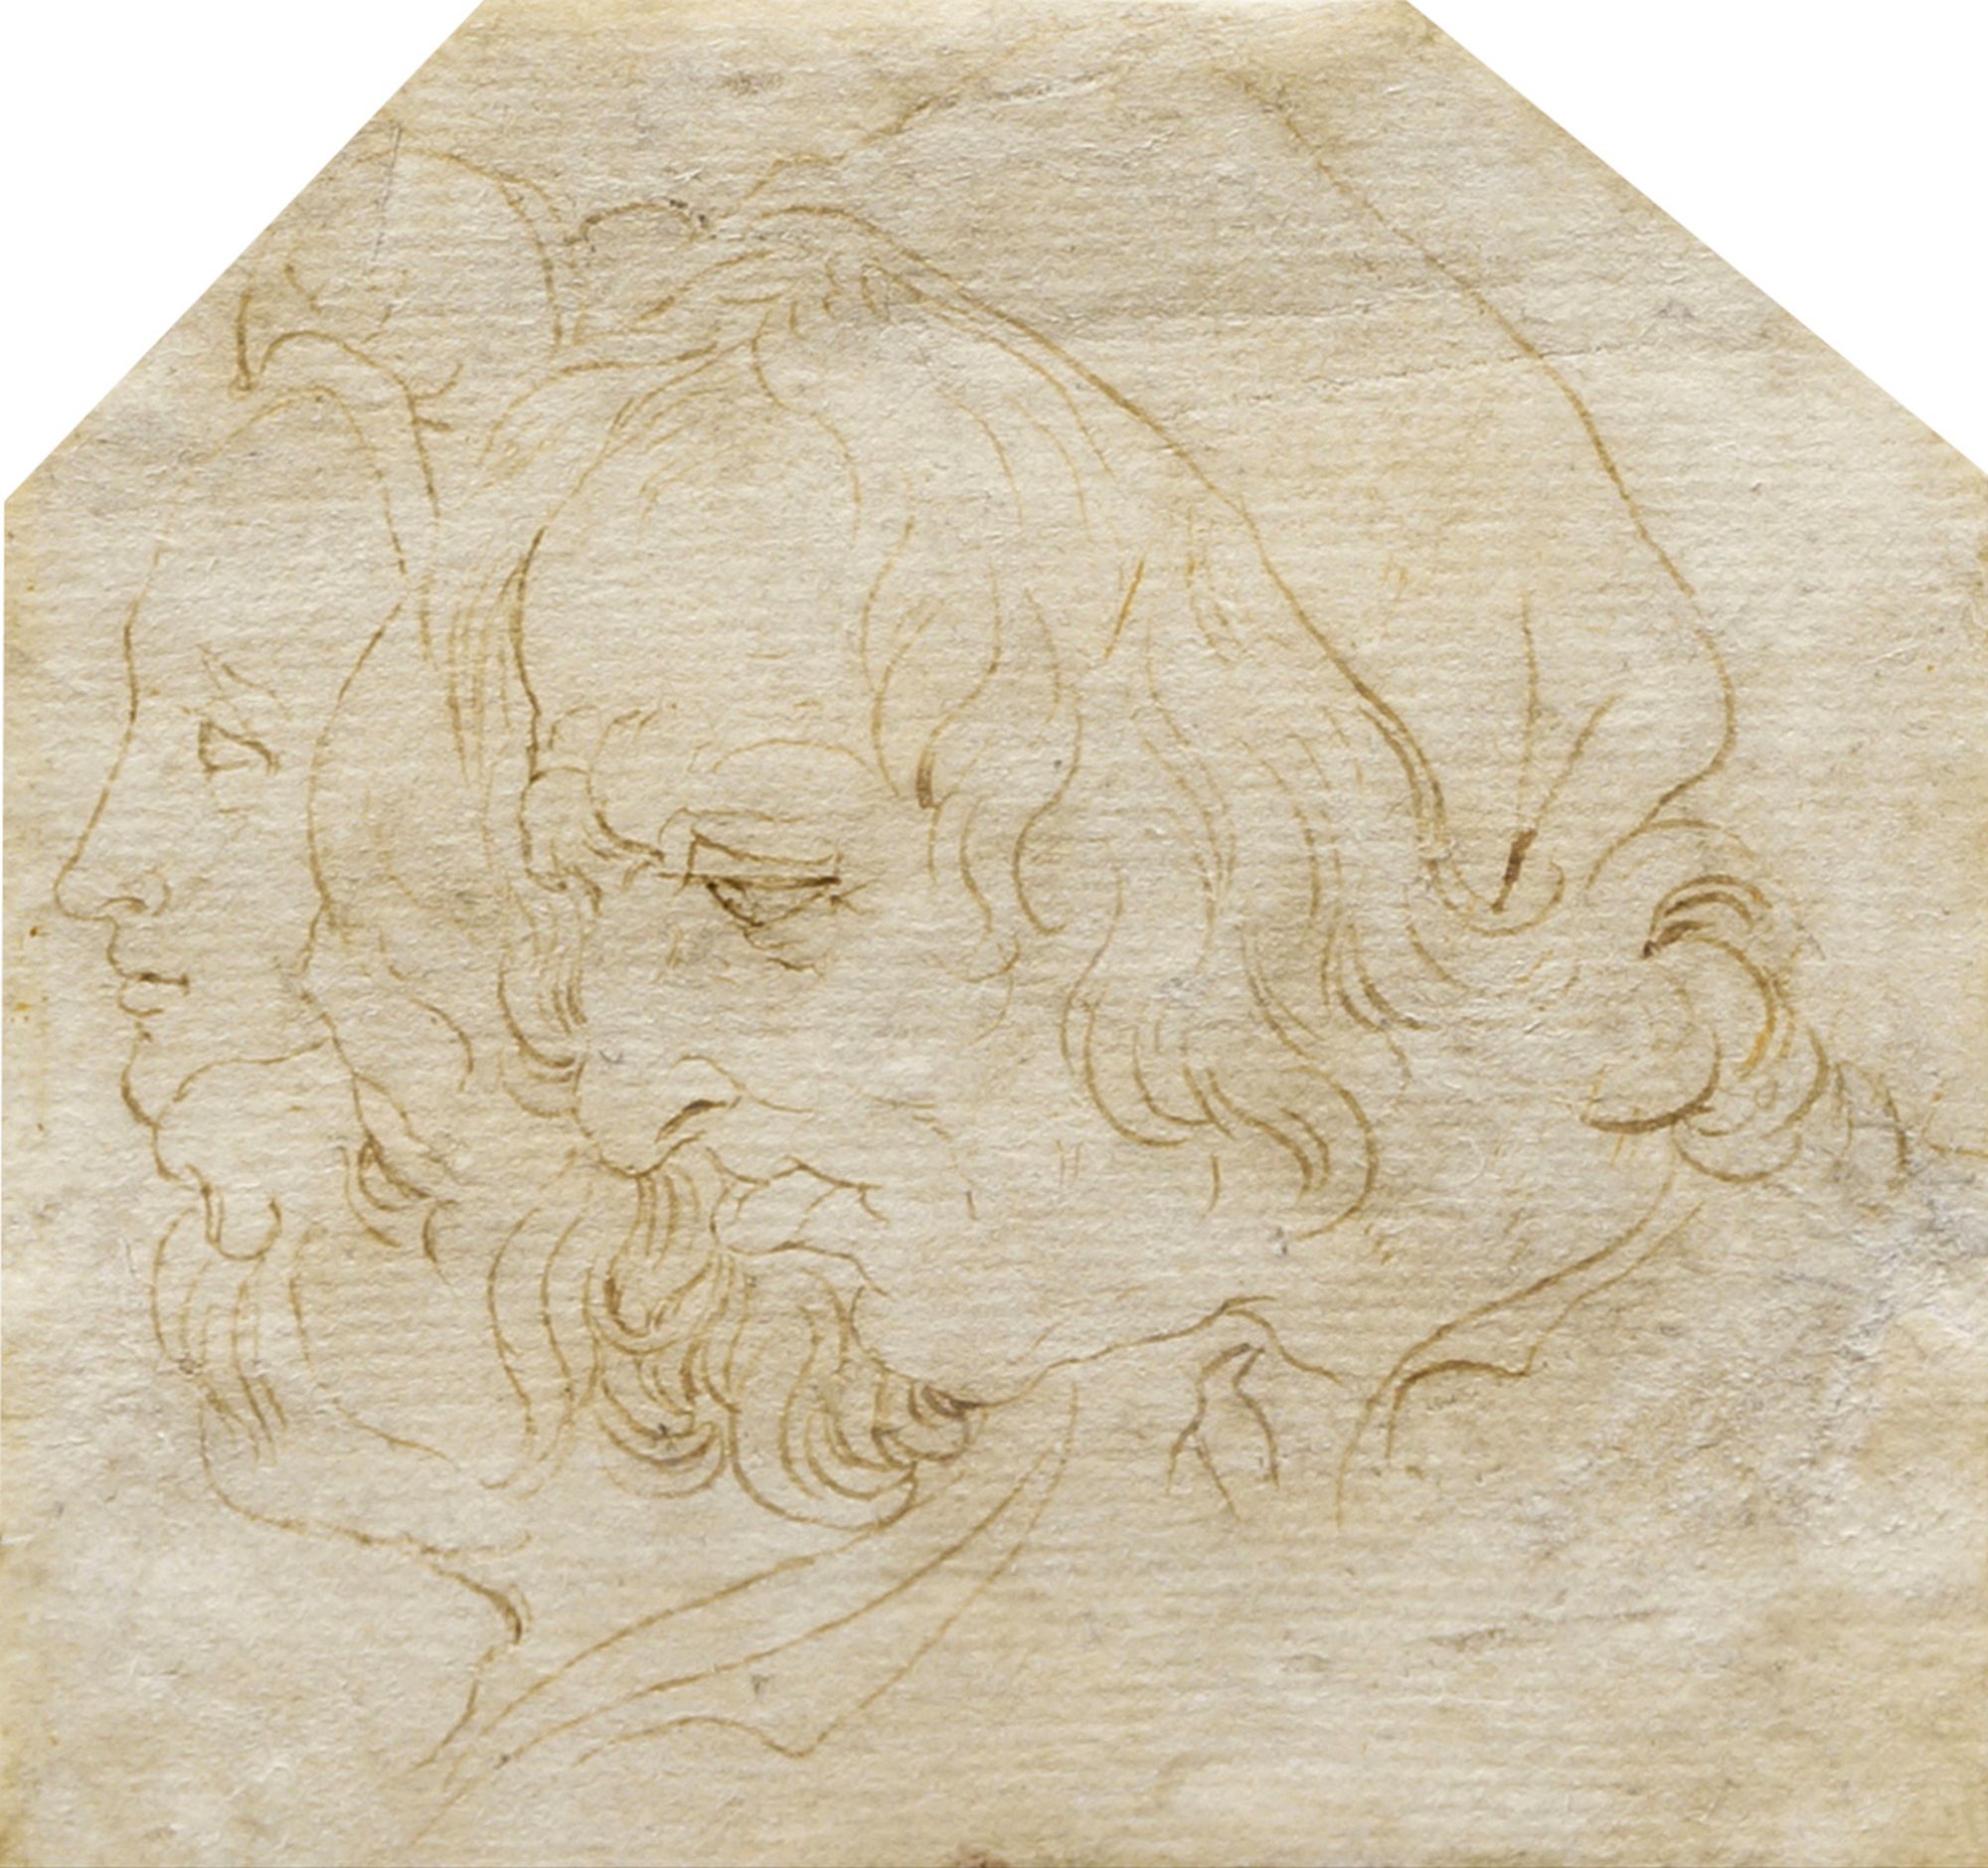 Attributed to Hendrick Goltzius, German/Dutch 1558-1617- Study of three heads; Pen and brown ink